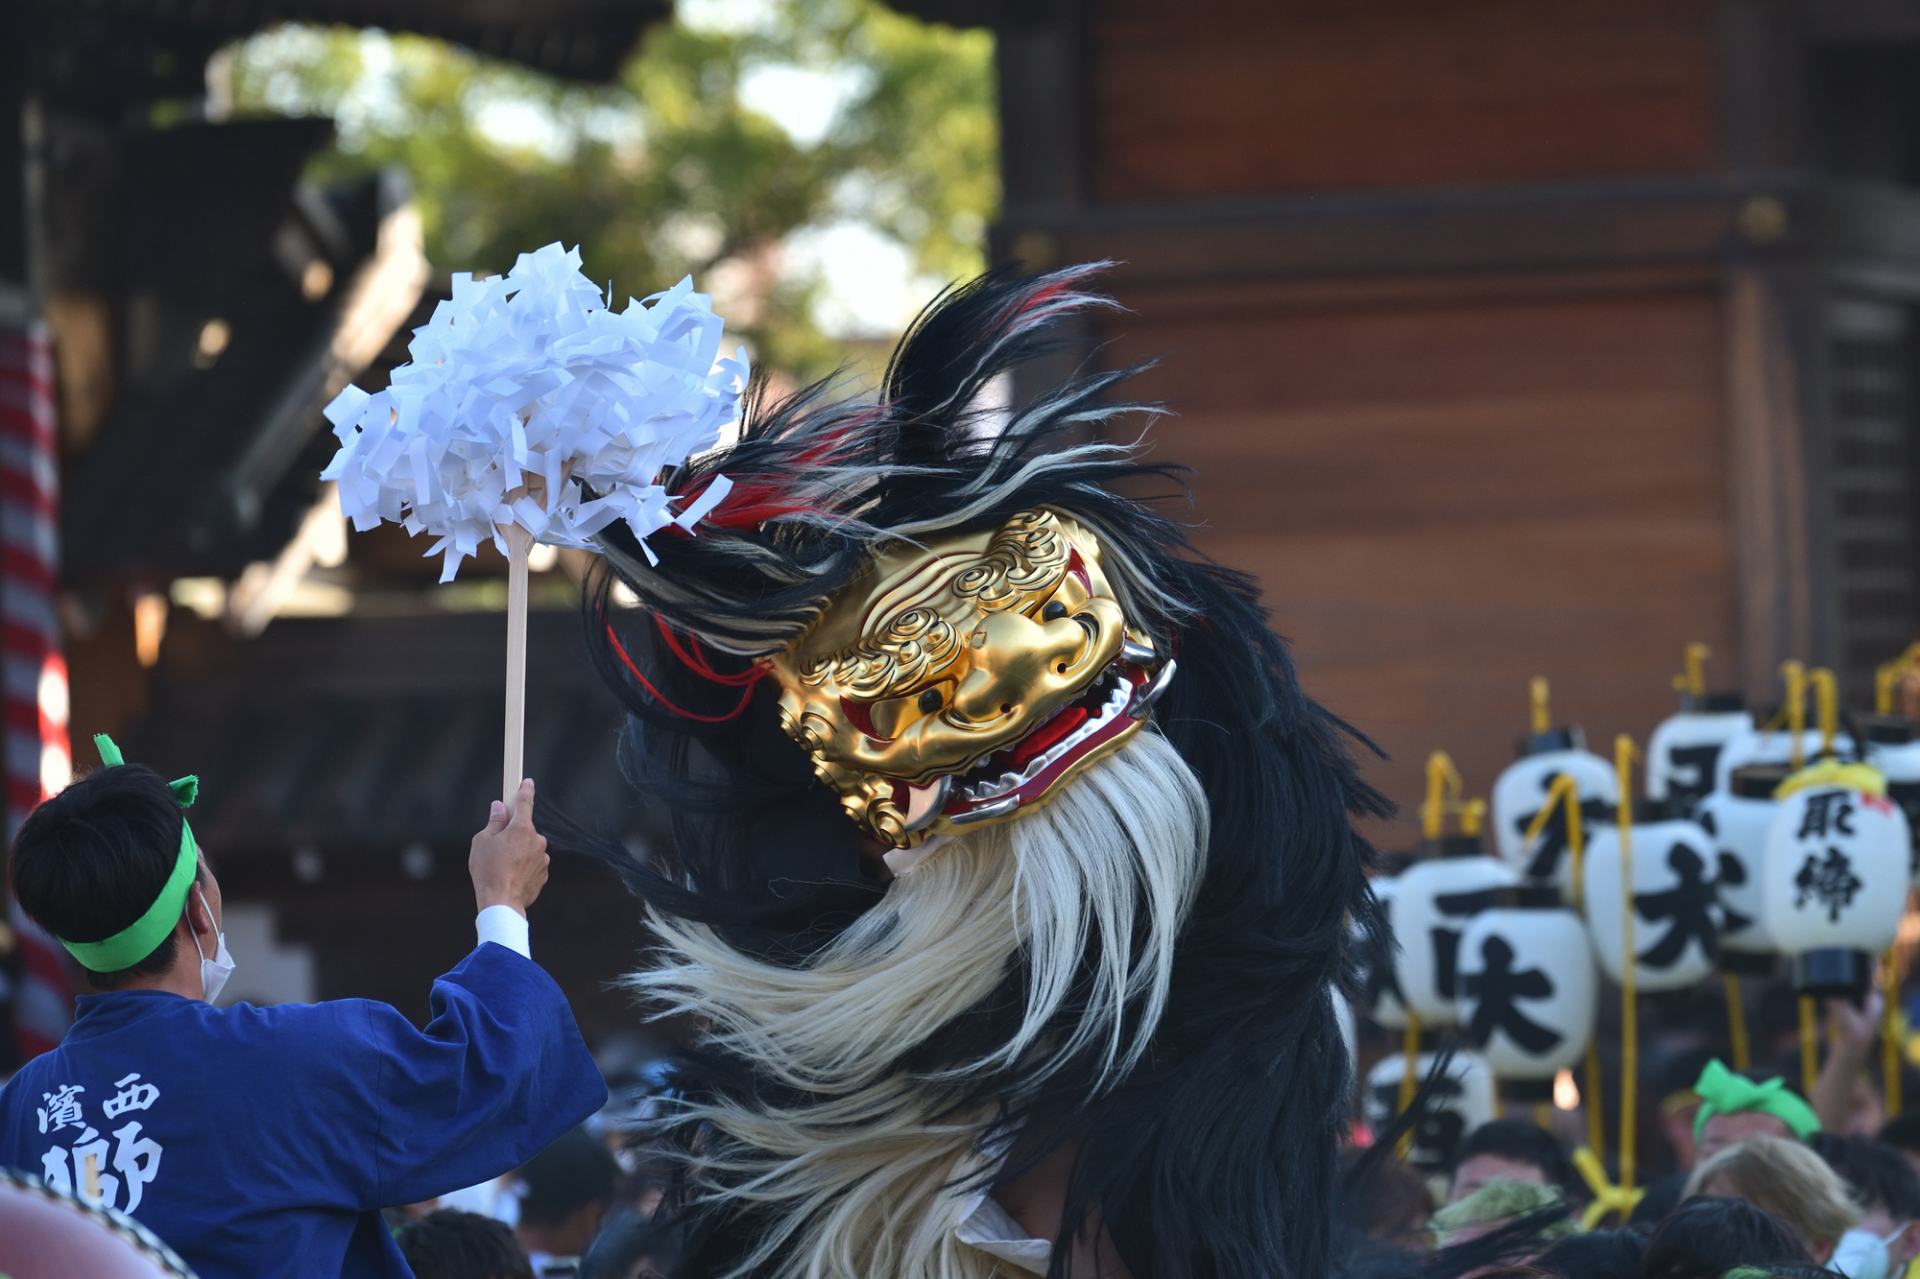 Consider embarking on a journey to explore Kansai's traditional crafts and performing arts.